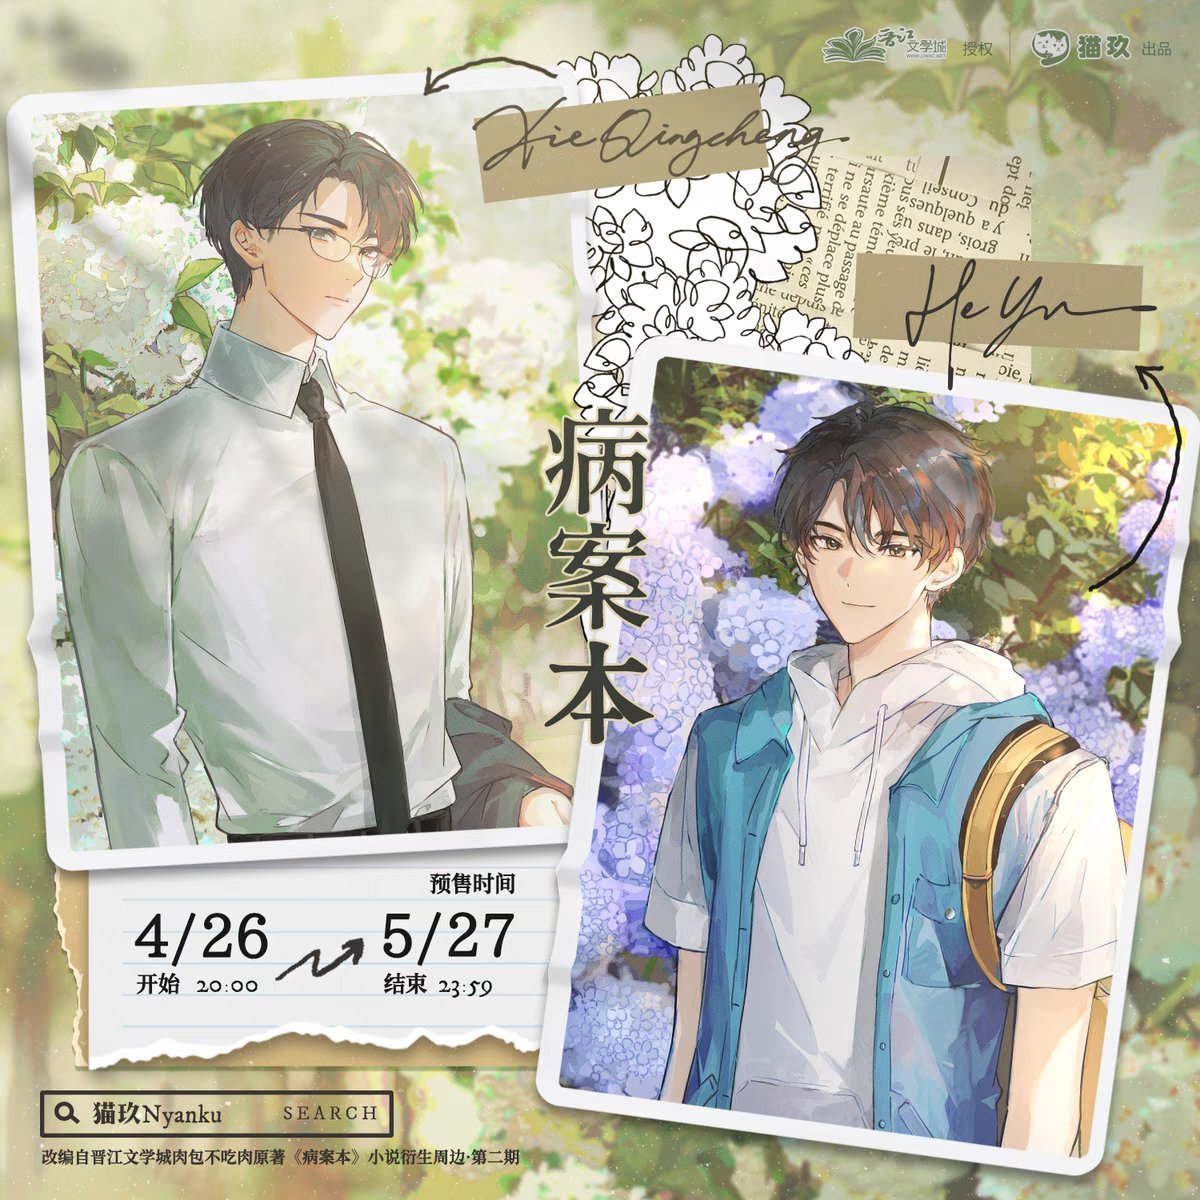 WE GOT XIE QINGCHENG IN GLASSES AND HE YU WITH HIS BACKPACK !!!! THE WAY YOU CAN FEEL THEIR 13 YO AGE GAP !!!!! 😭😭💕💕